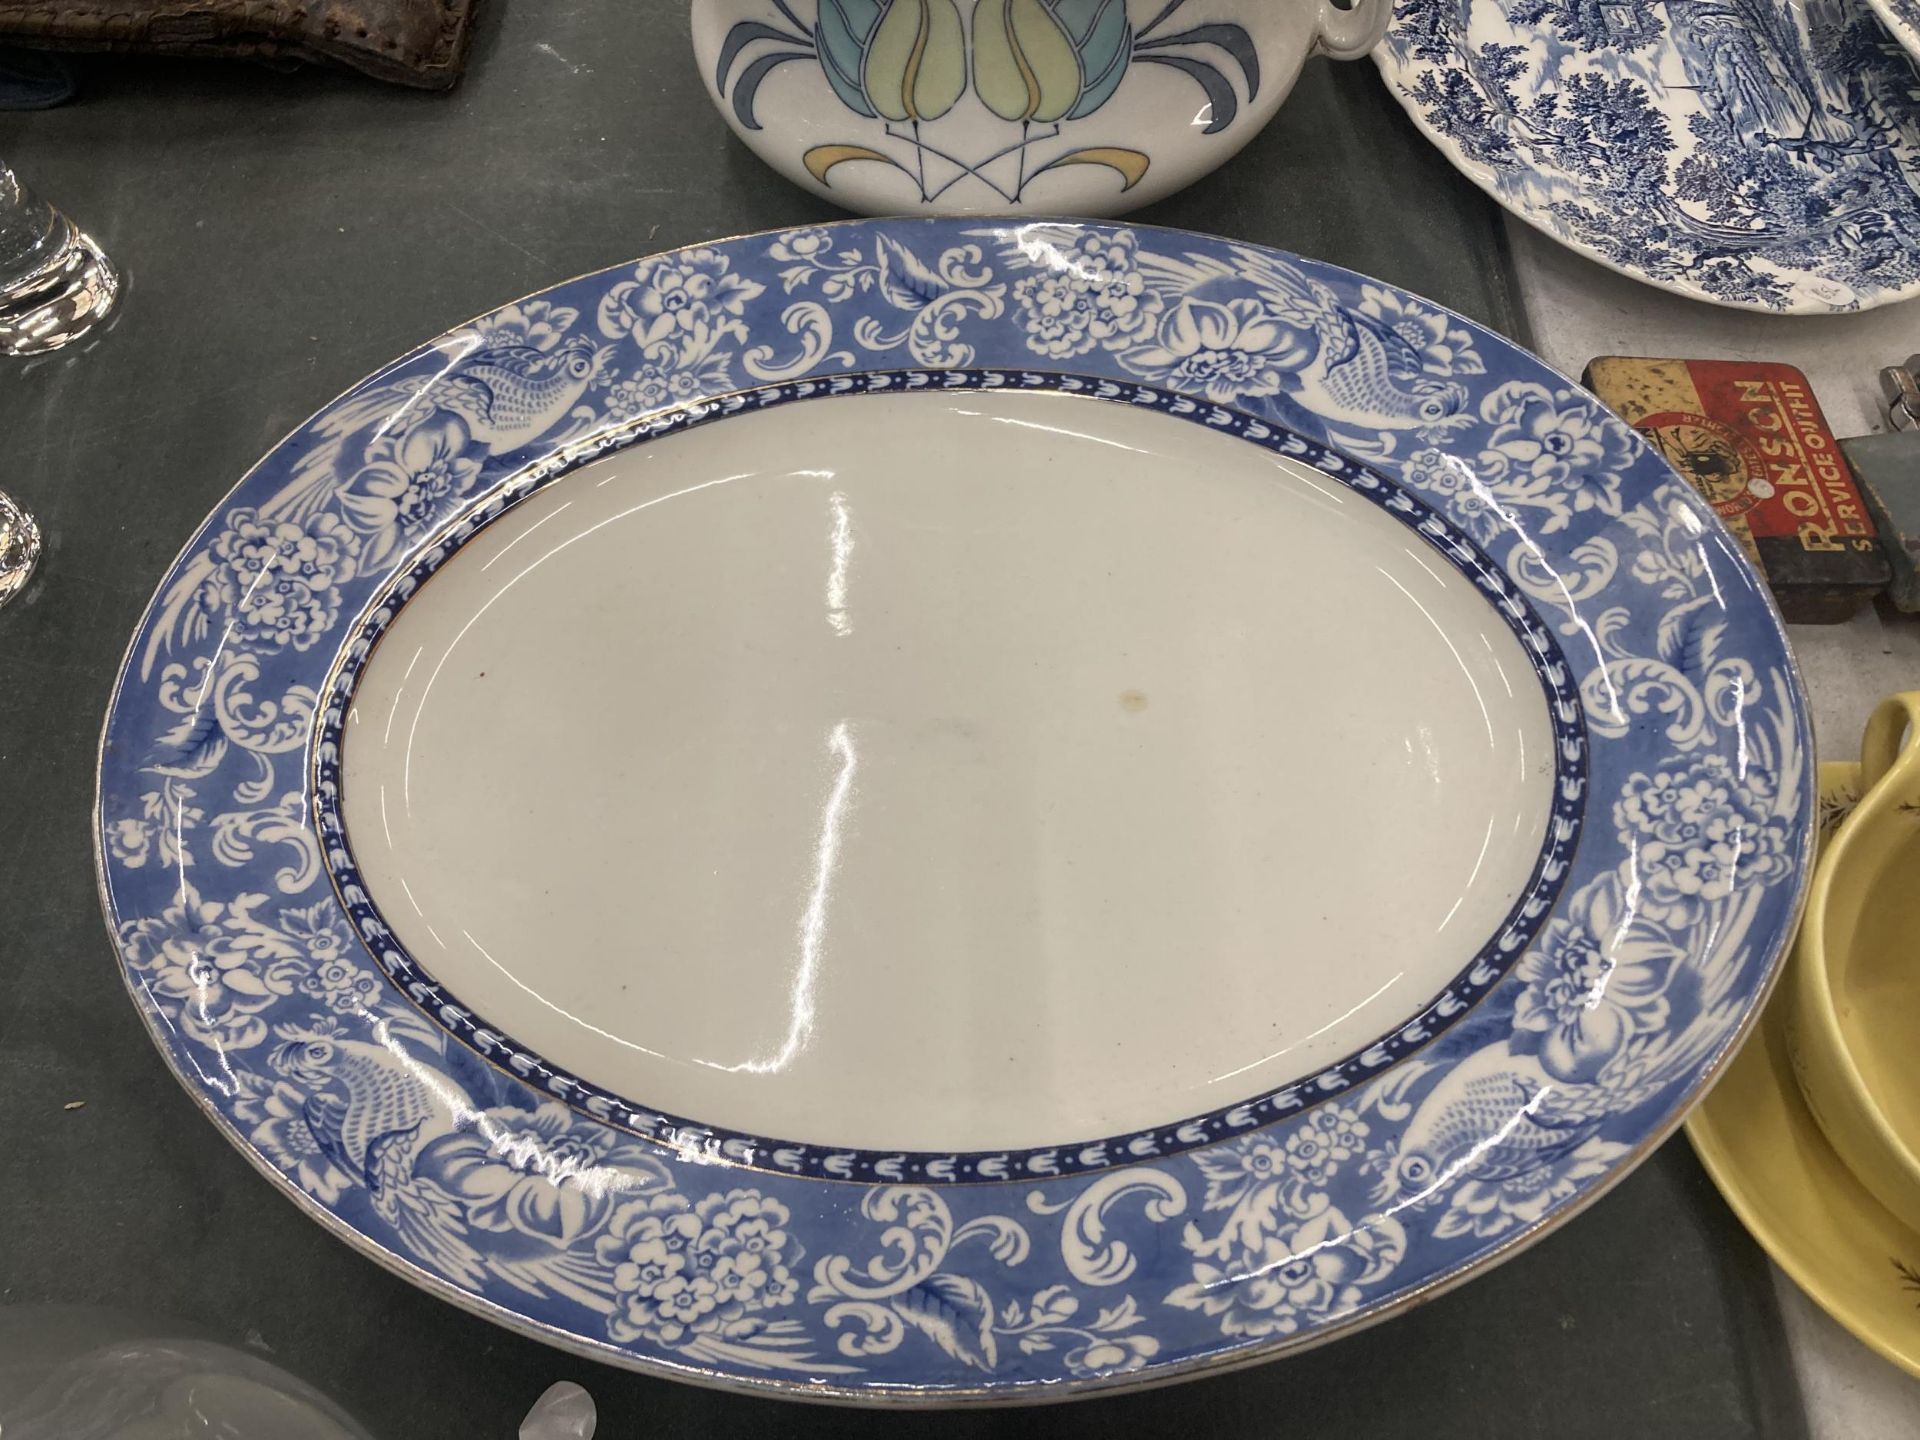 A LARGE DAVENPORT PLATTER AND AN ALFRED PEARCE CHAMBER POT WITH RETRO DESIGN - Image 5 of 5